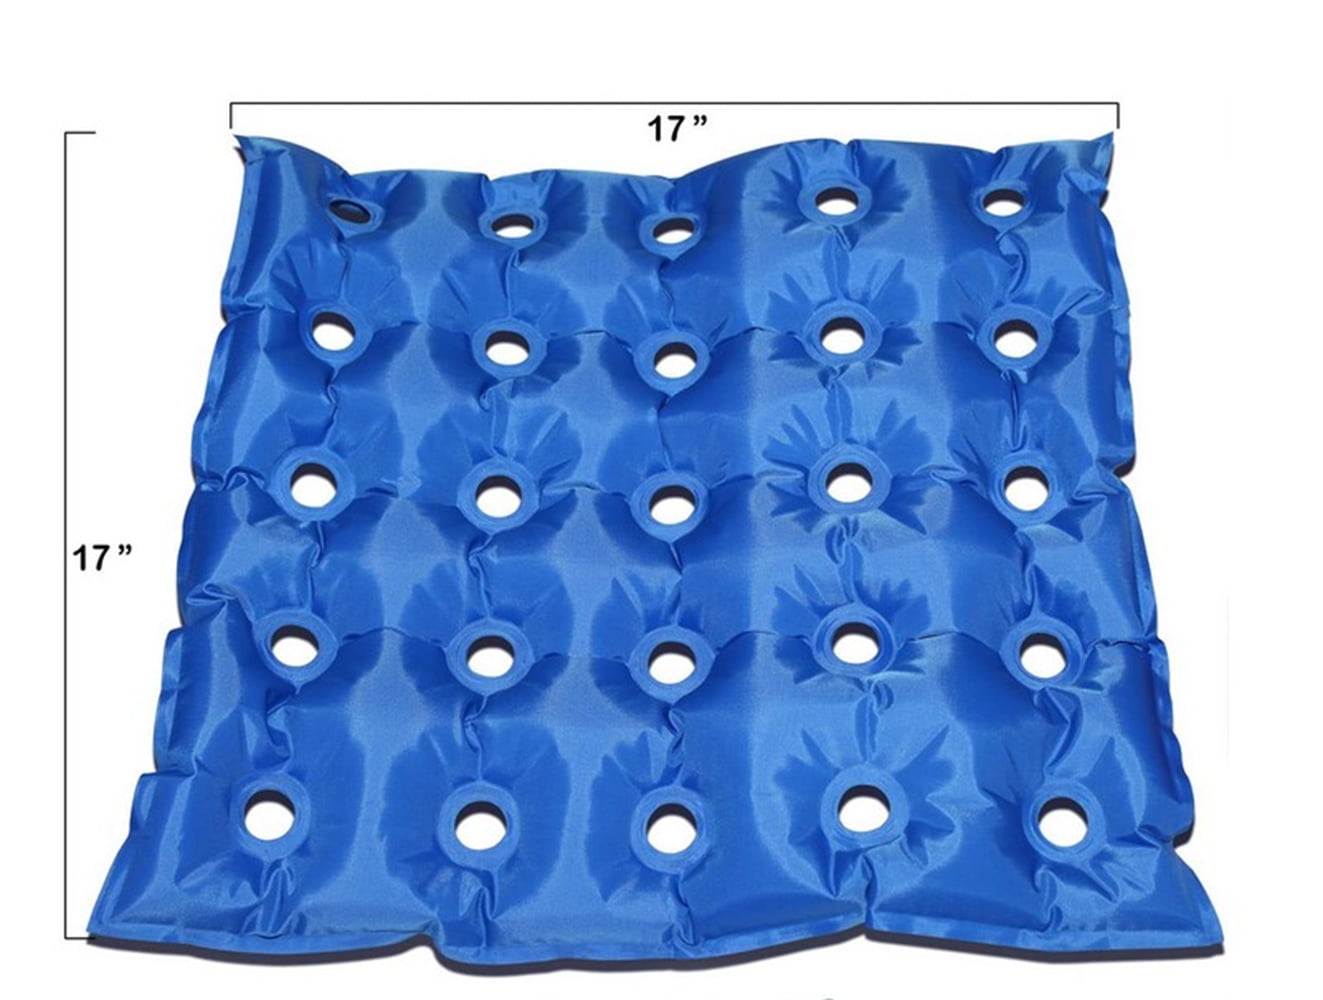 Inflatable Seat Cushions For Pressure Relief, Wheelchair Cushion For Pressure  Sore, Bed Sore Cushions For Butt For Elderly, Pressure Sore Cushions For  Sitting In Recliner, Inflatable Seat Cushions For Pressure Relief 